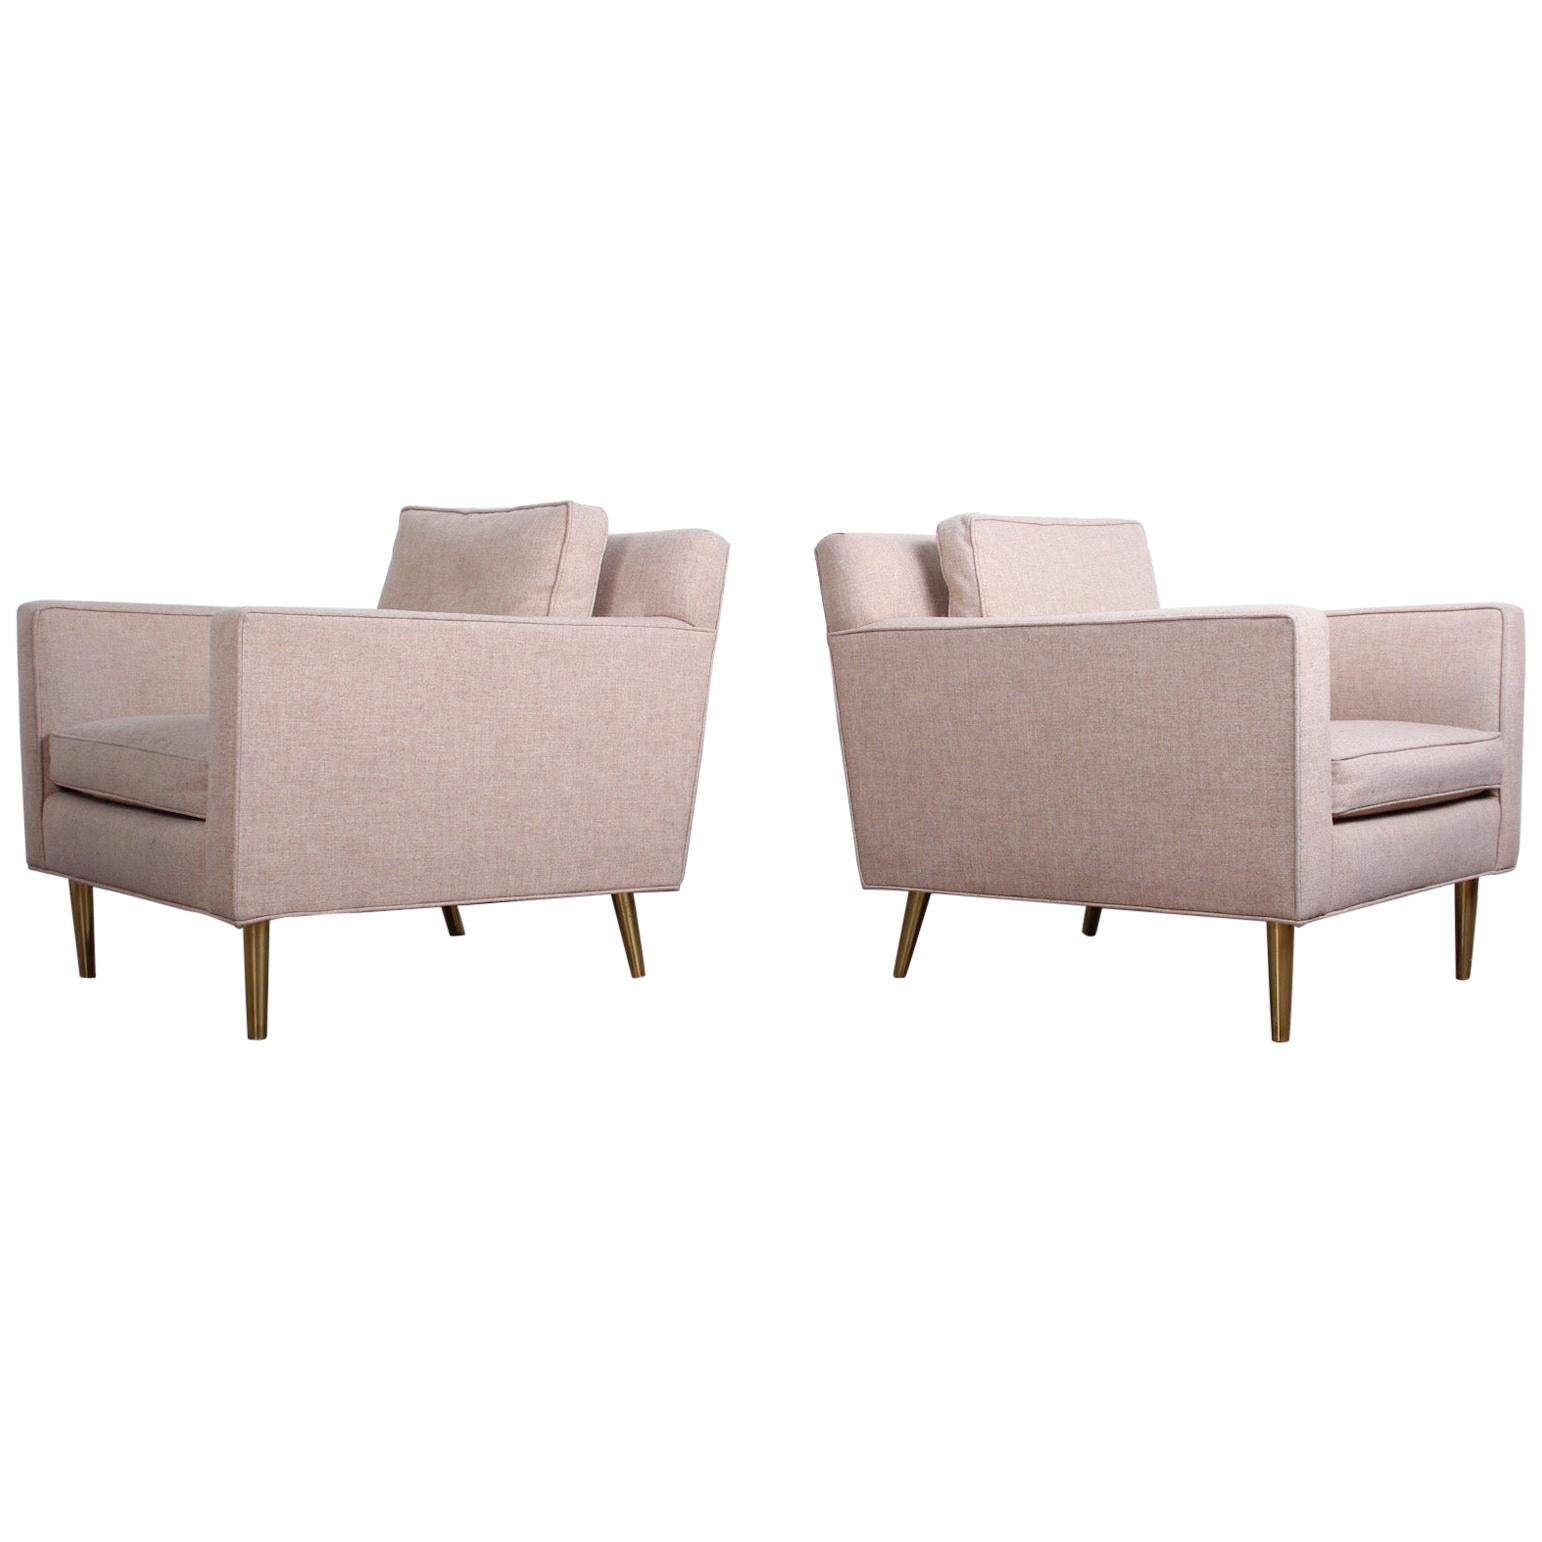 Pair of Lounge Chairs by Edward Wormley for Dunbar